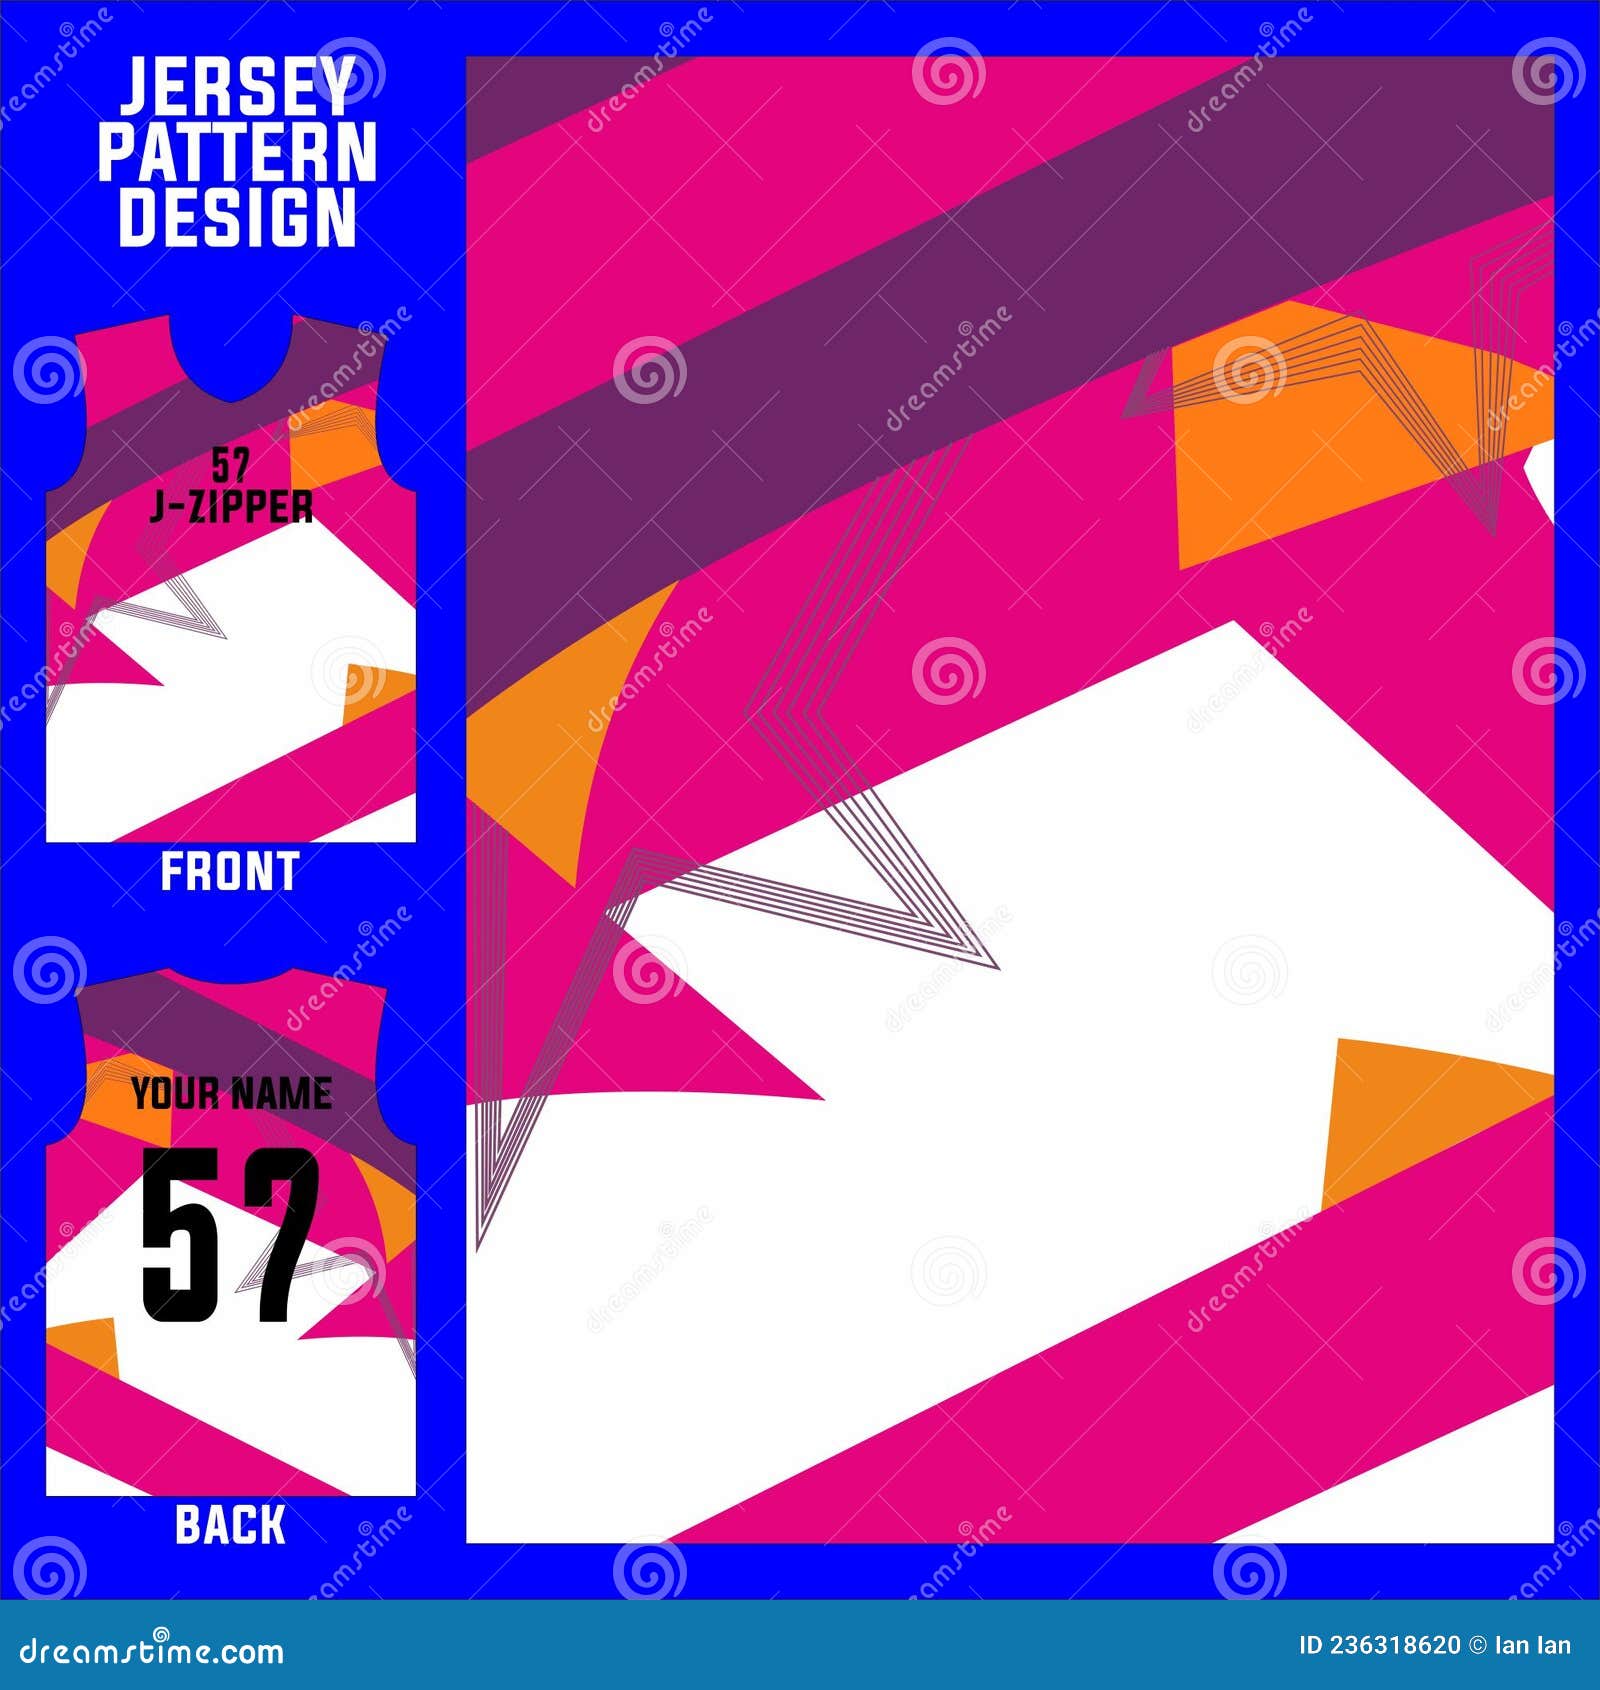 Basketball Jersey Pattern Design Template. Pink Abstract Background for  Fabric Pattern Stock Vector - Illustration of bicycle, template: 244759382